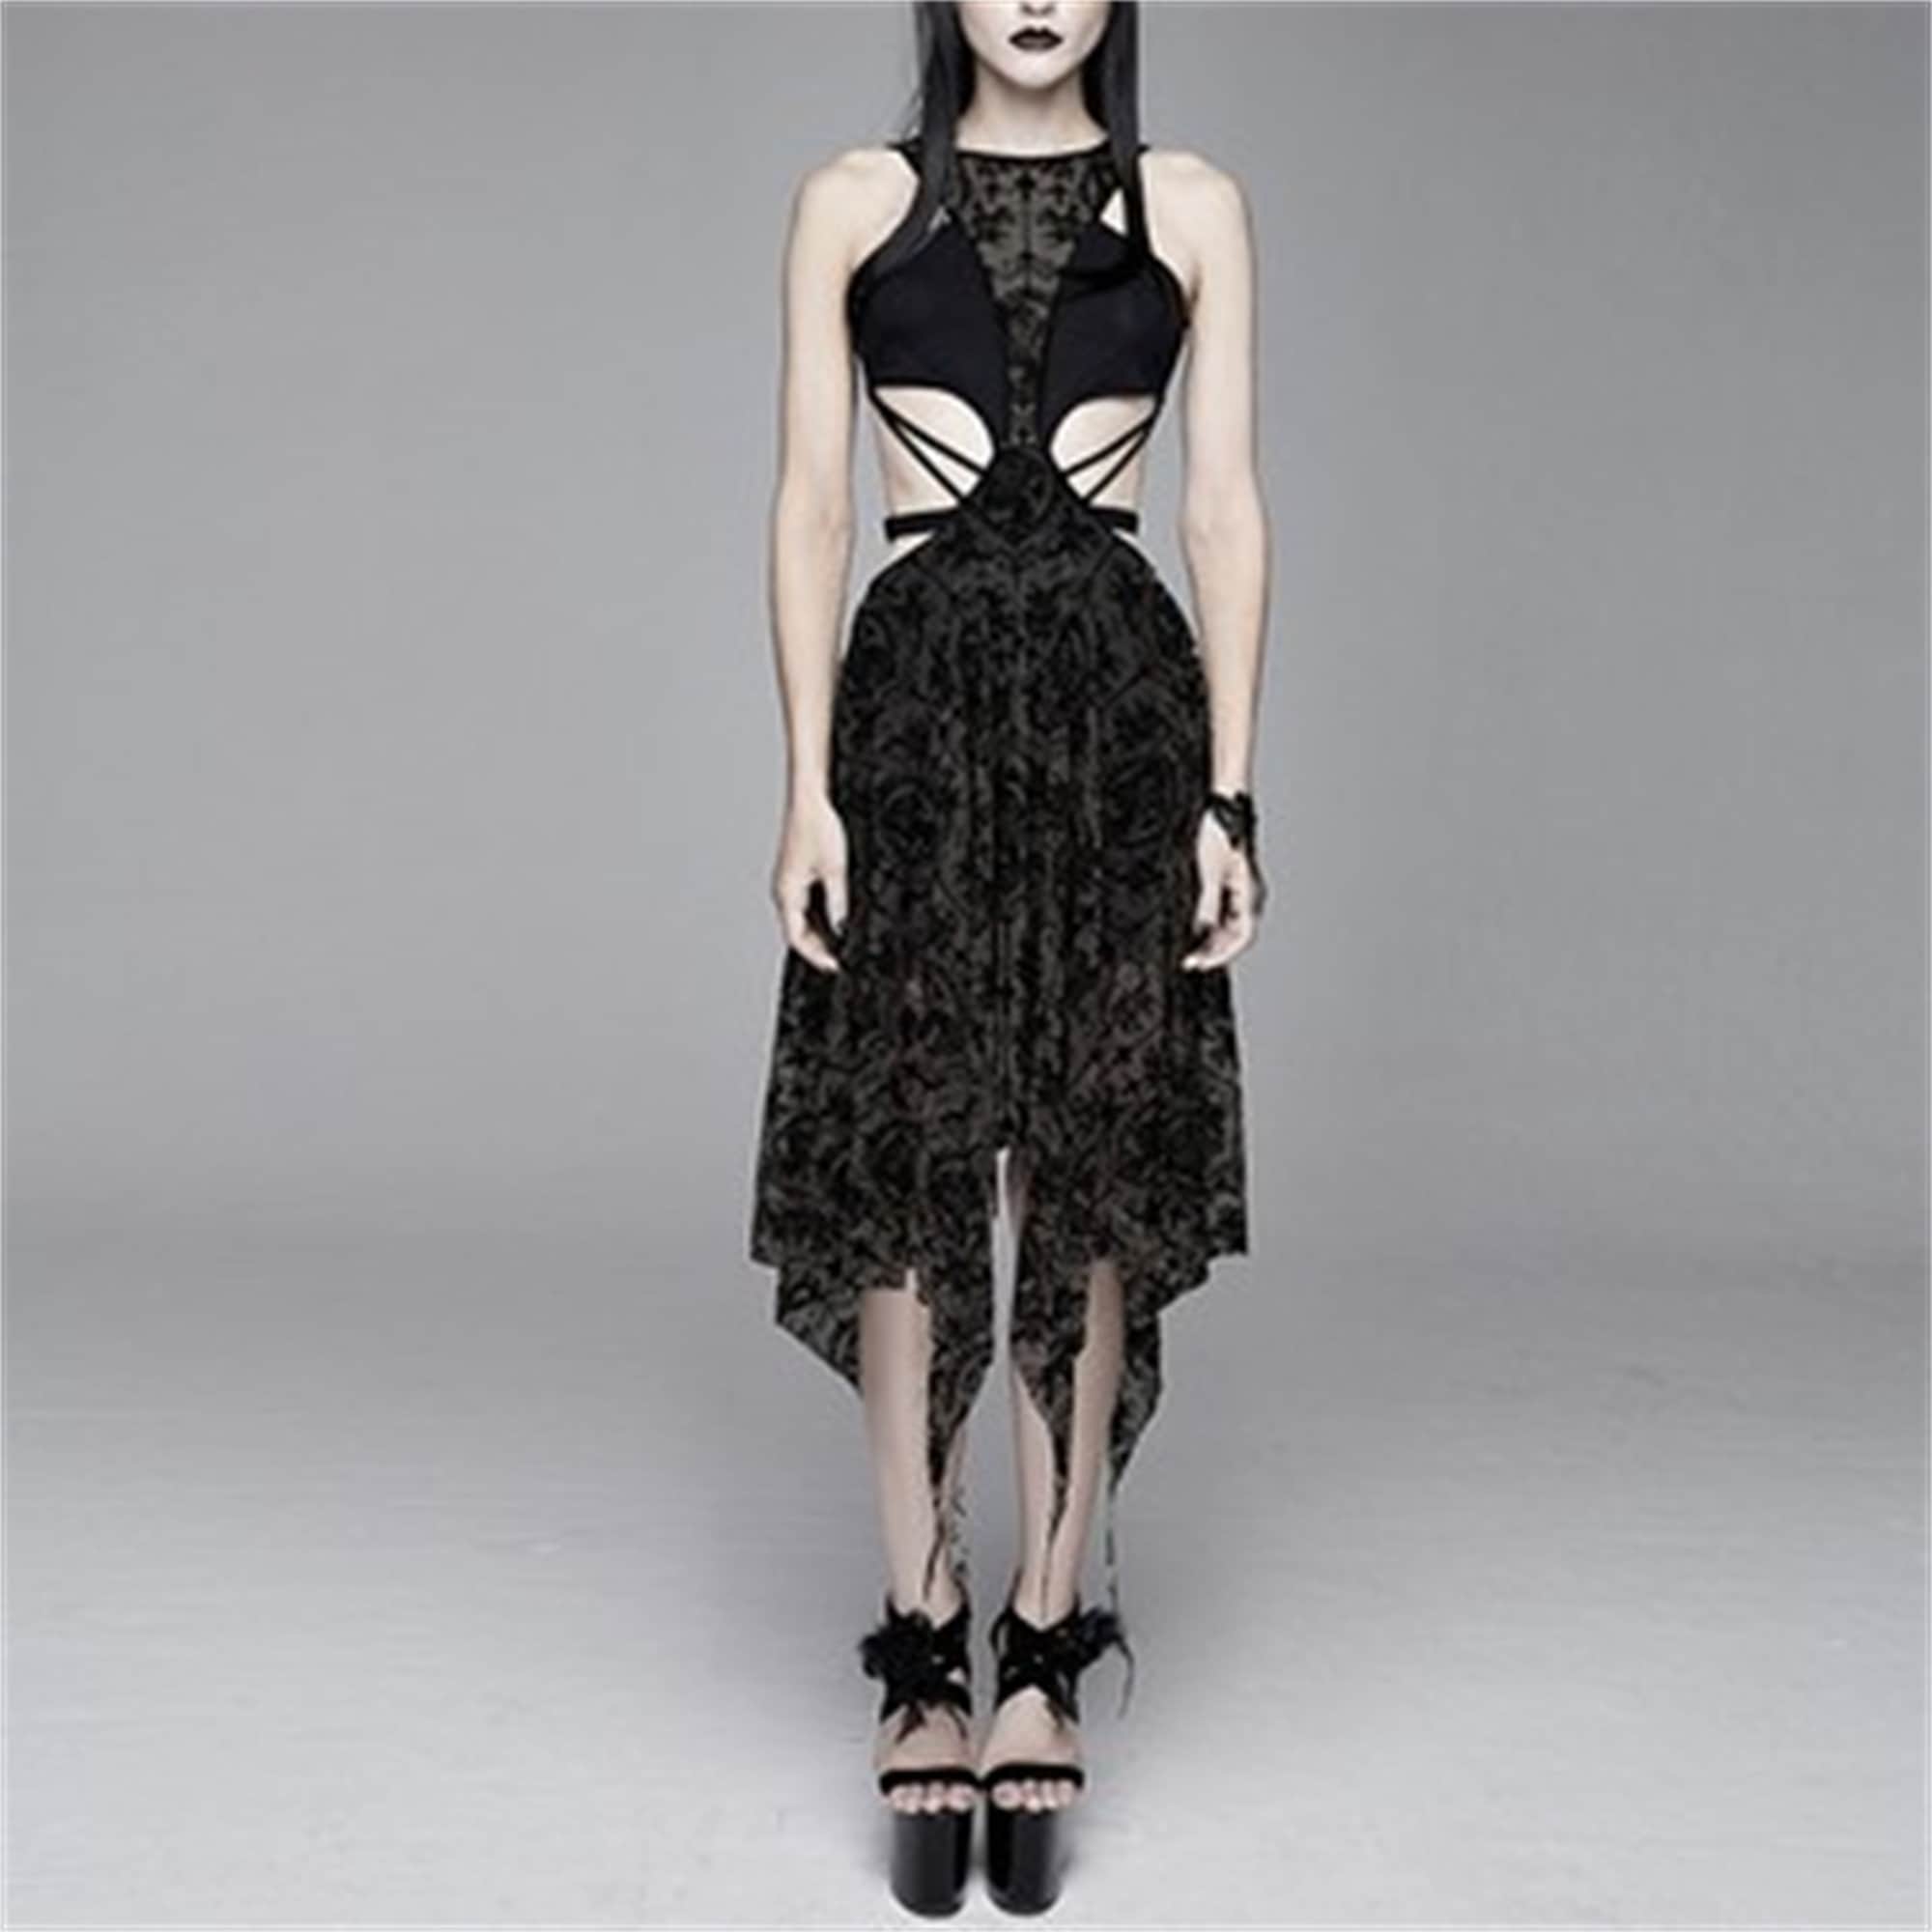 Gothic Halter Style Chest Wrap Dress Vintage Lace Dress Sexy Perspective Sleeveless Long Dress Dark Elegant Dress Holiday Party Dress